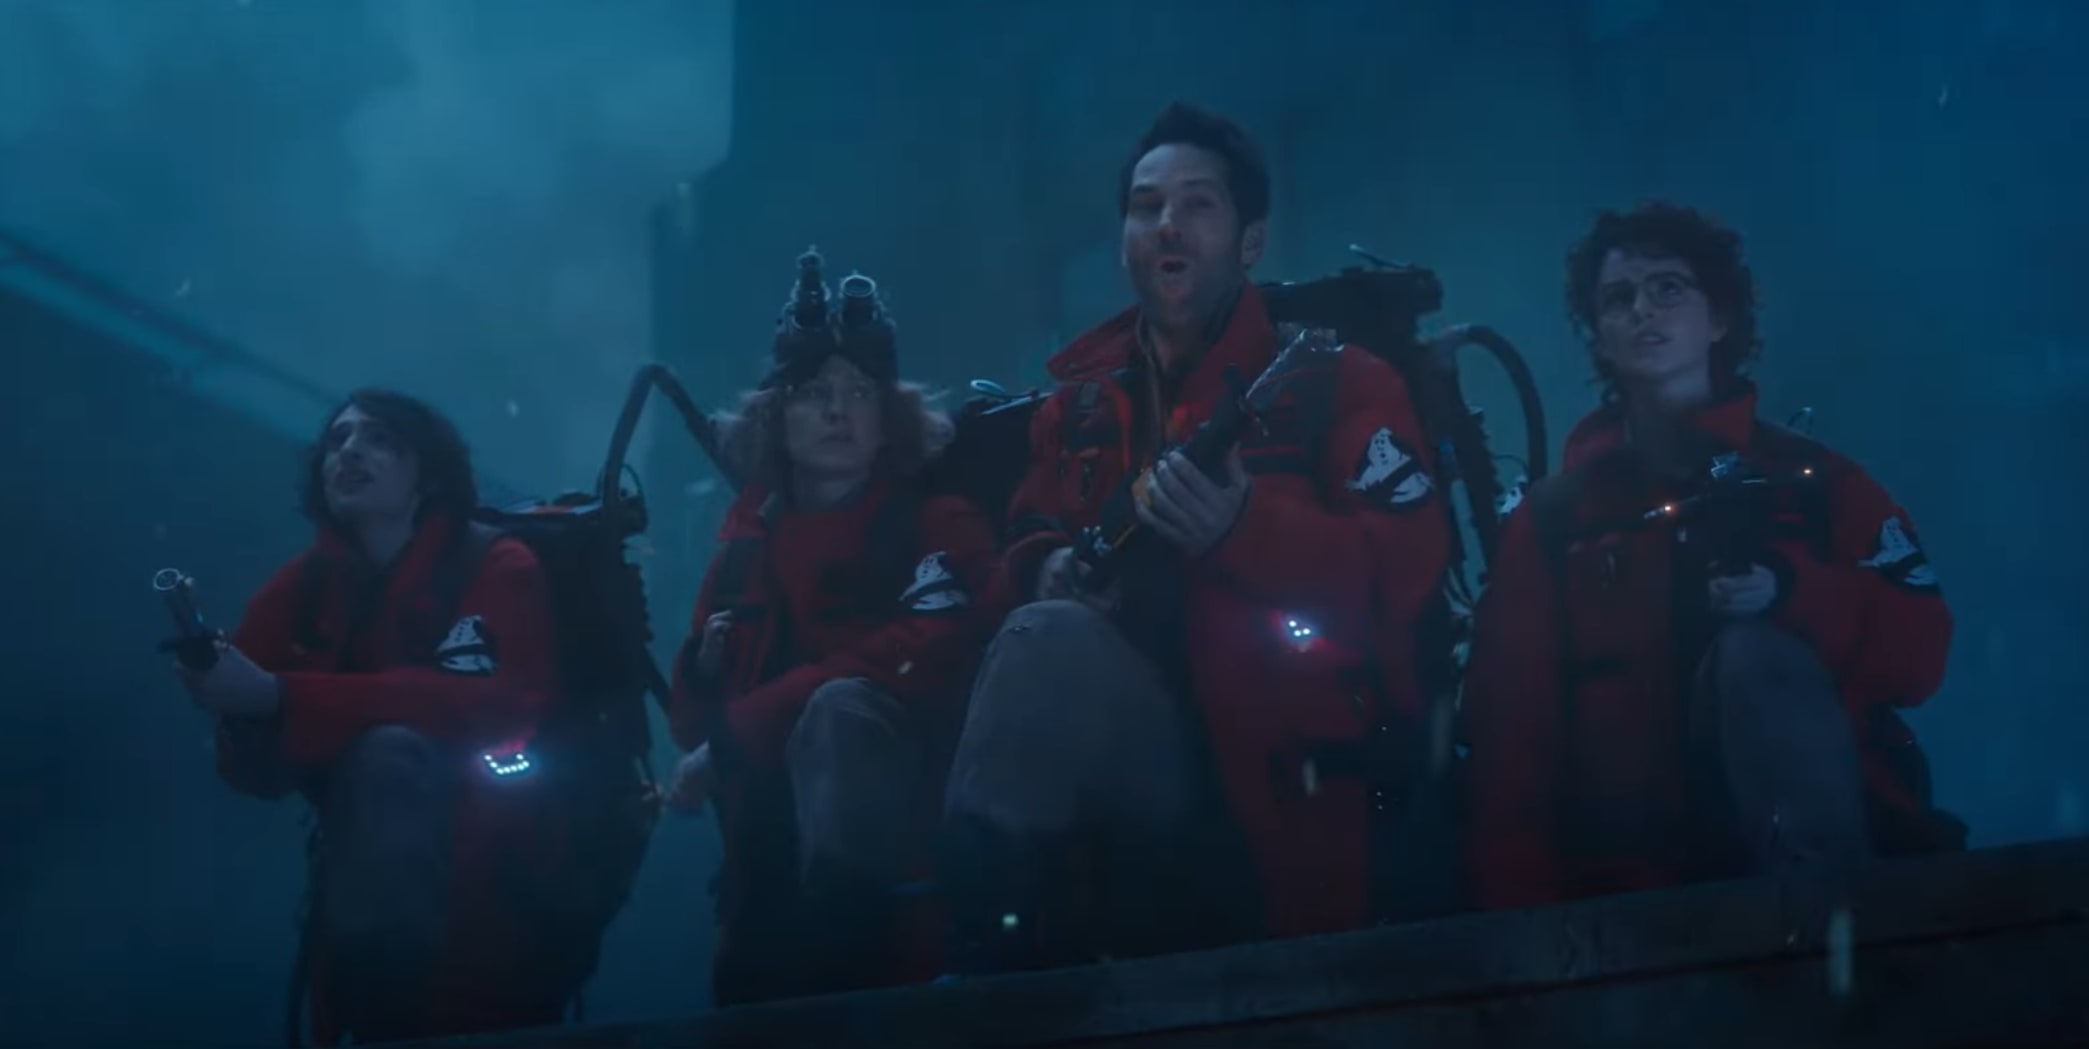 Ghostbusters are back in new 'Frozen Empire' trailer